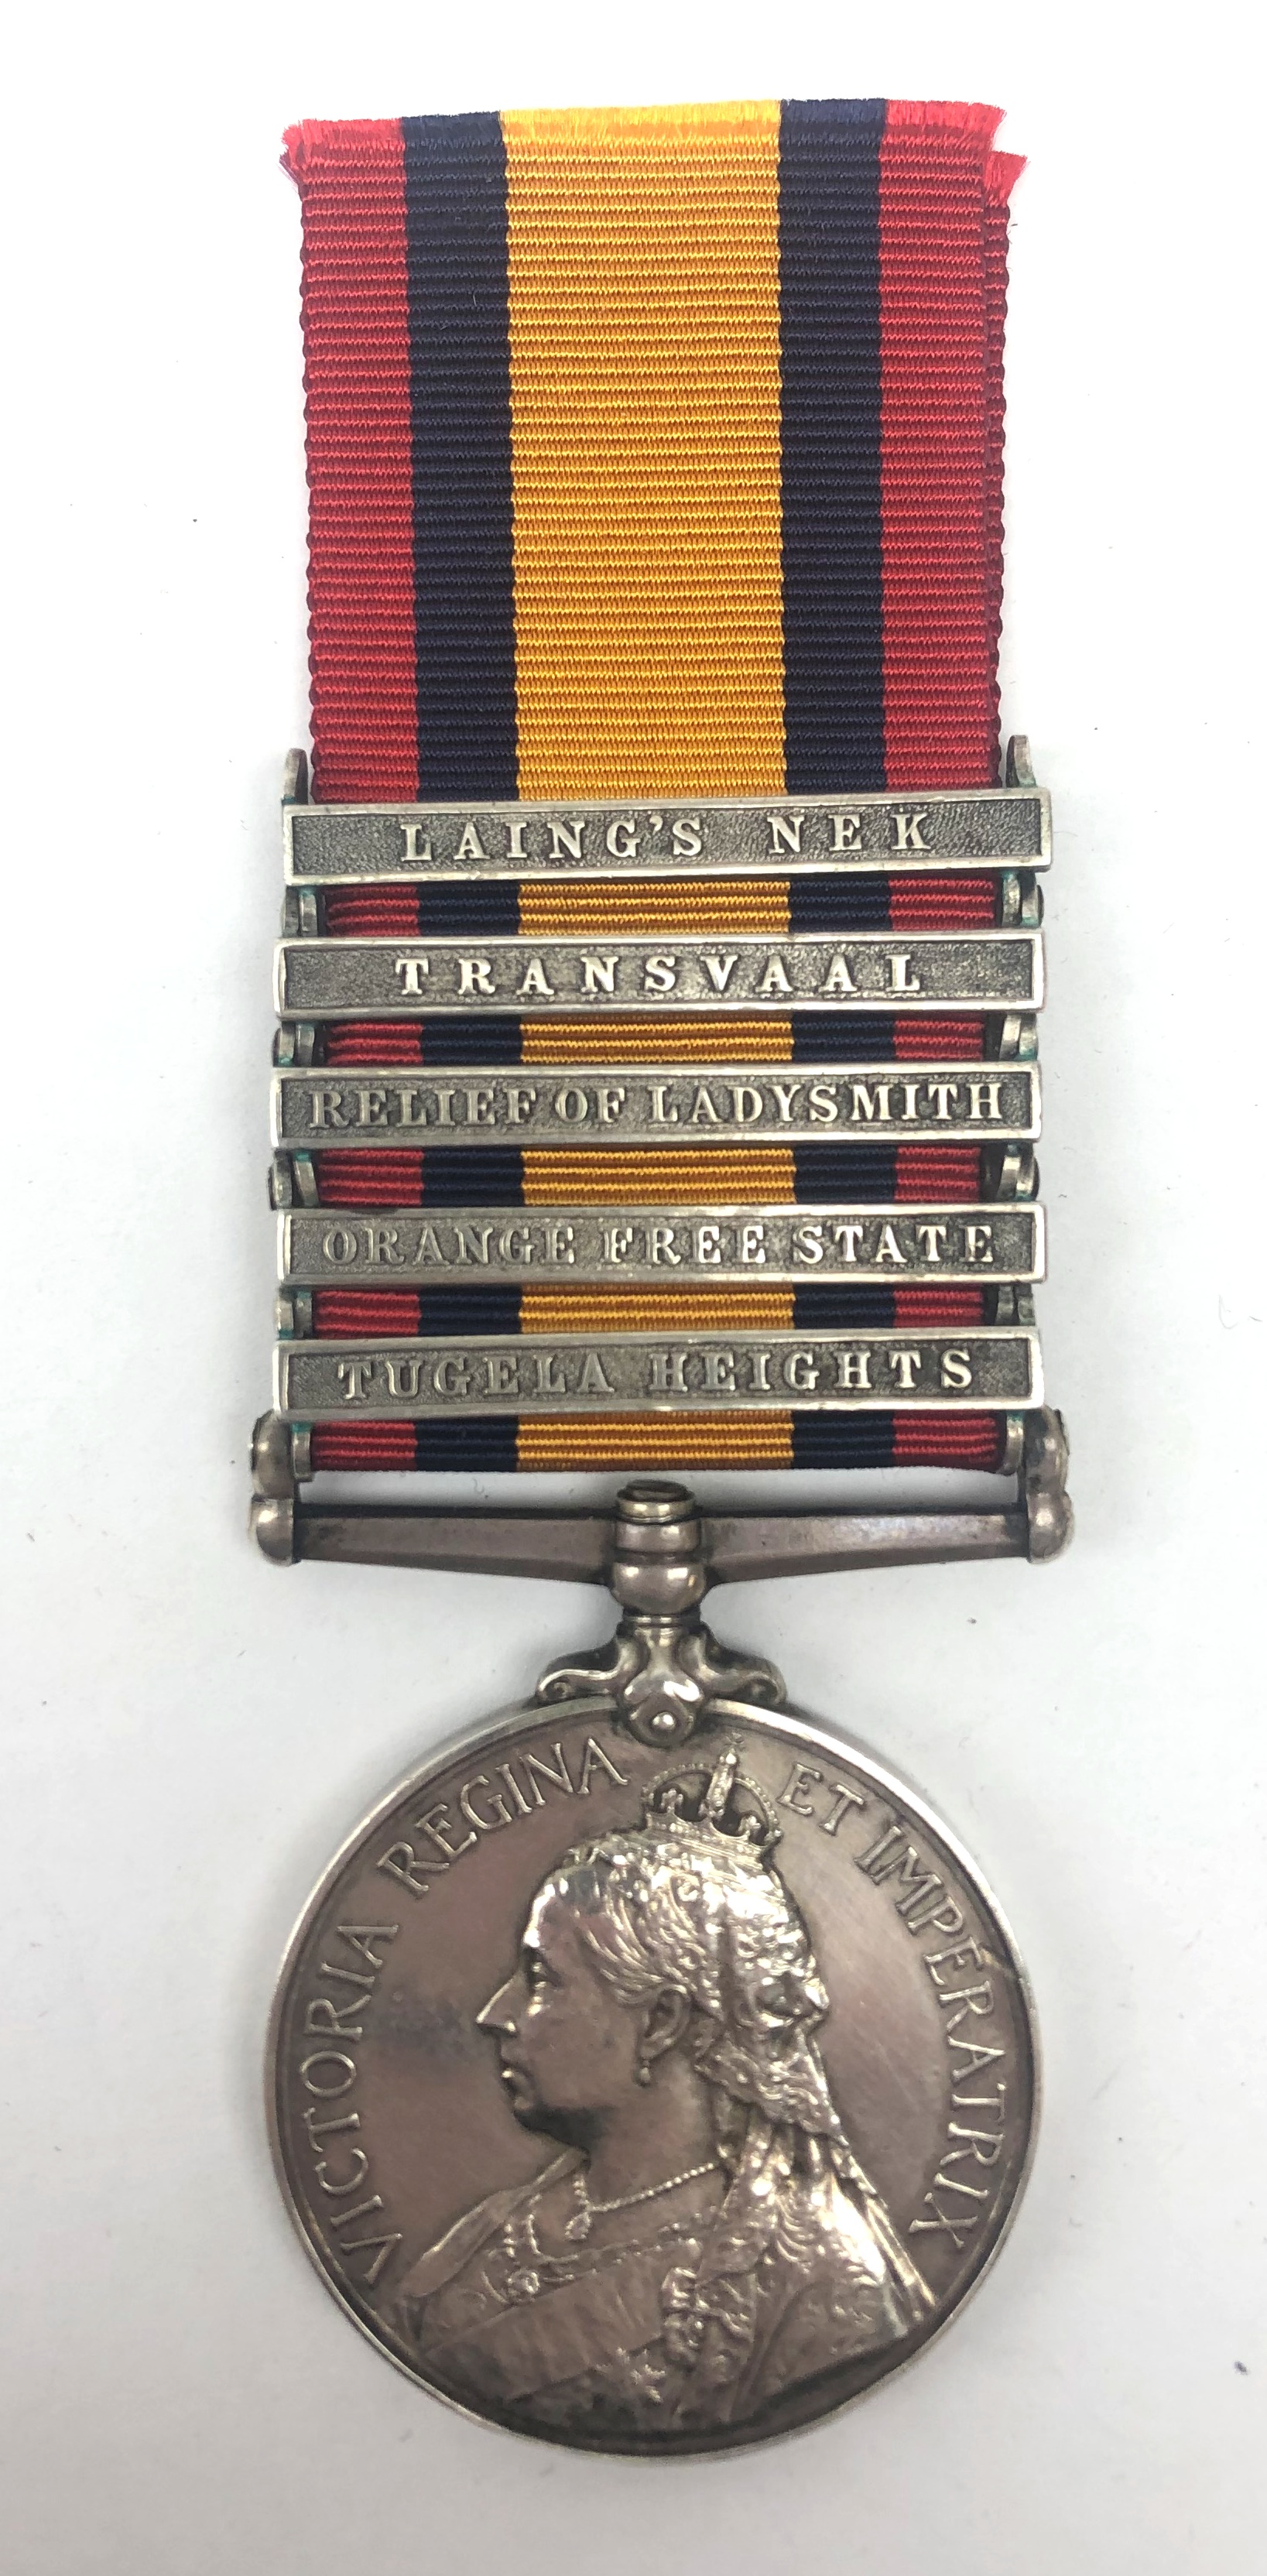 Queens South Africa medal, with clasps for Laing's Nek, Transvaal.